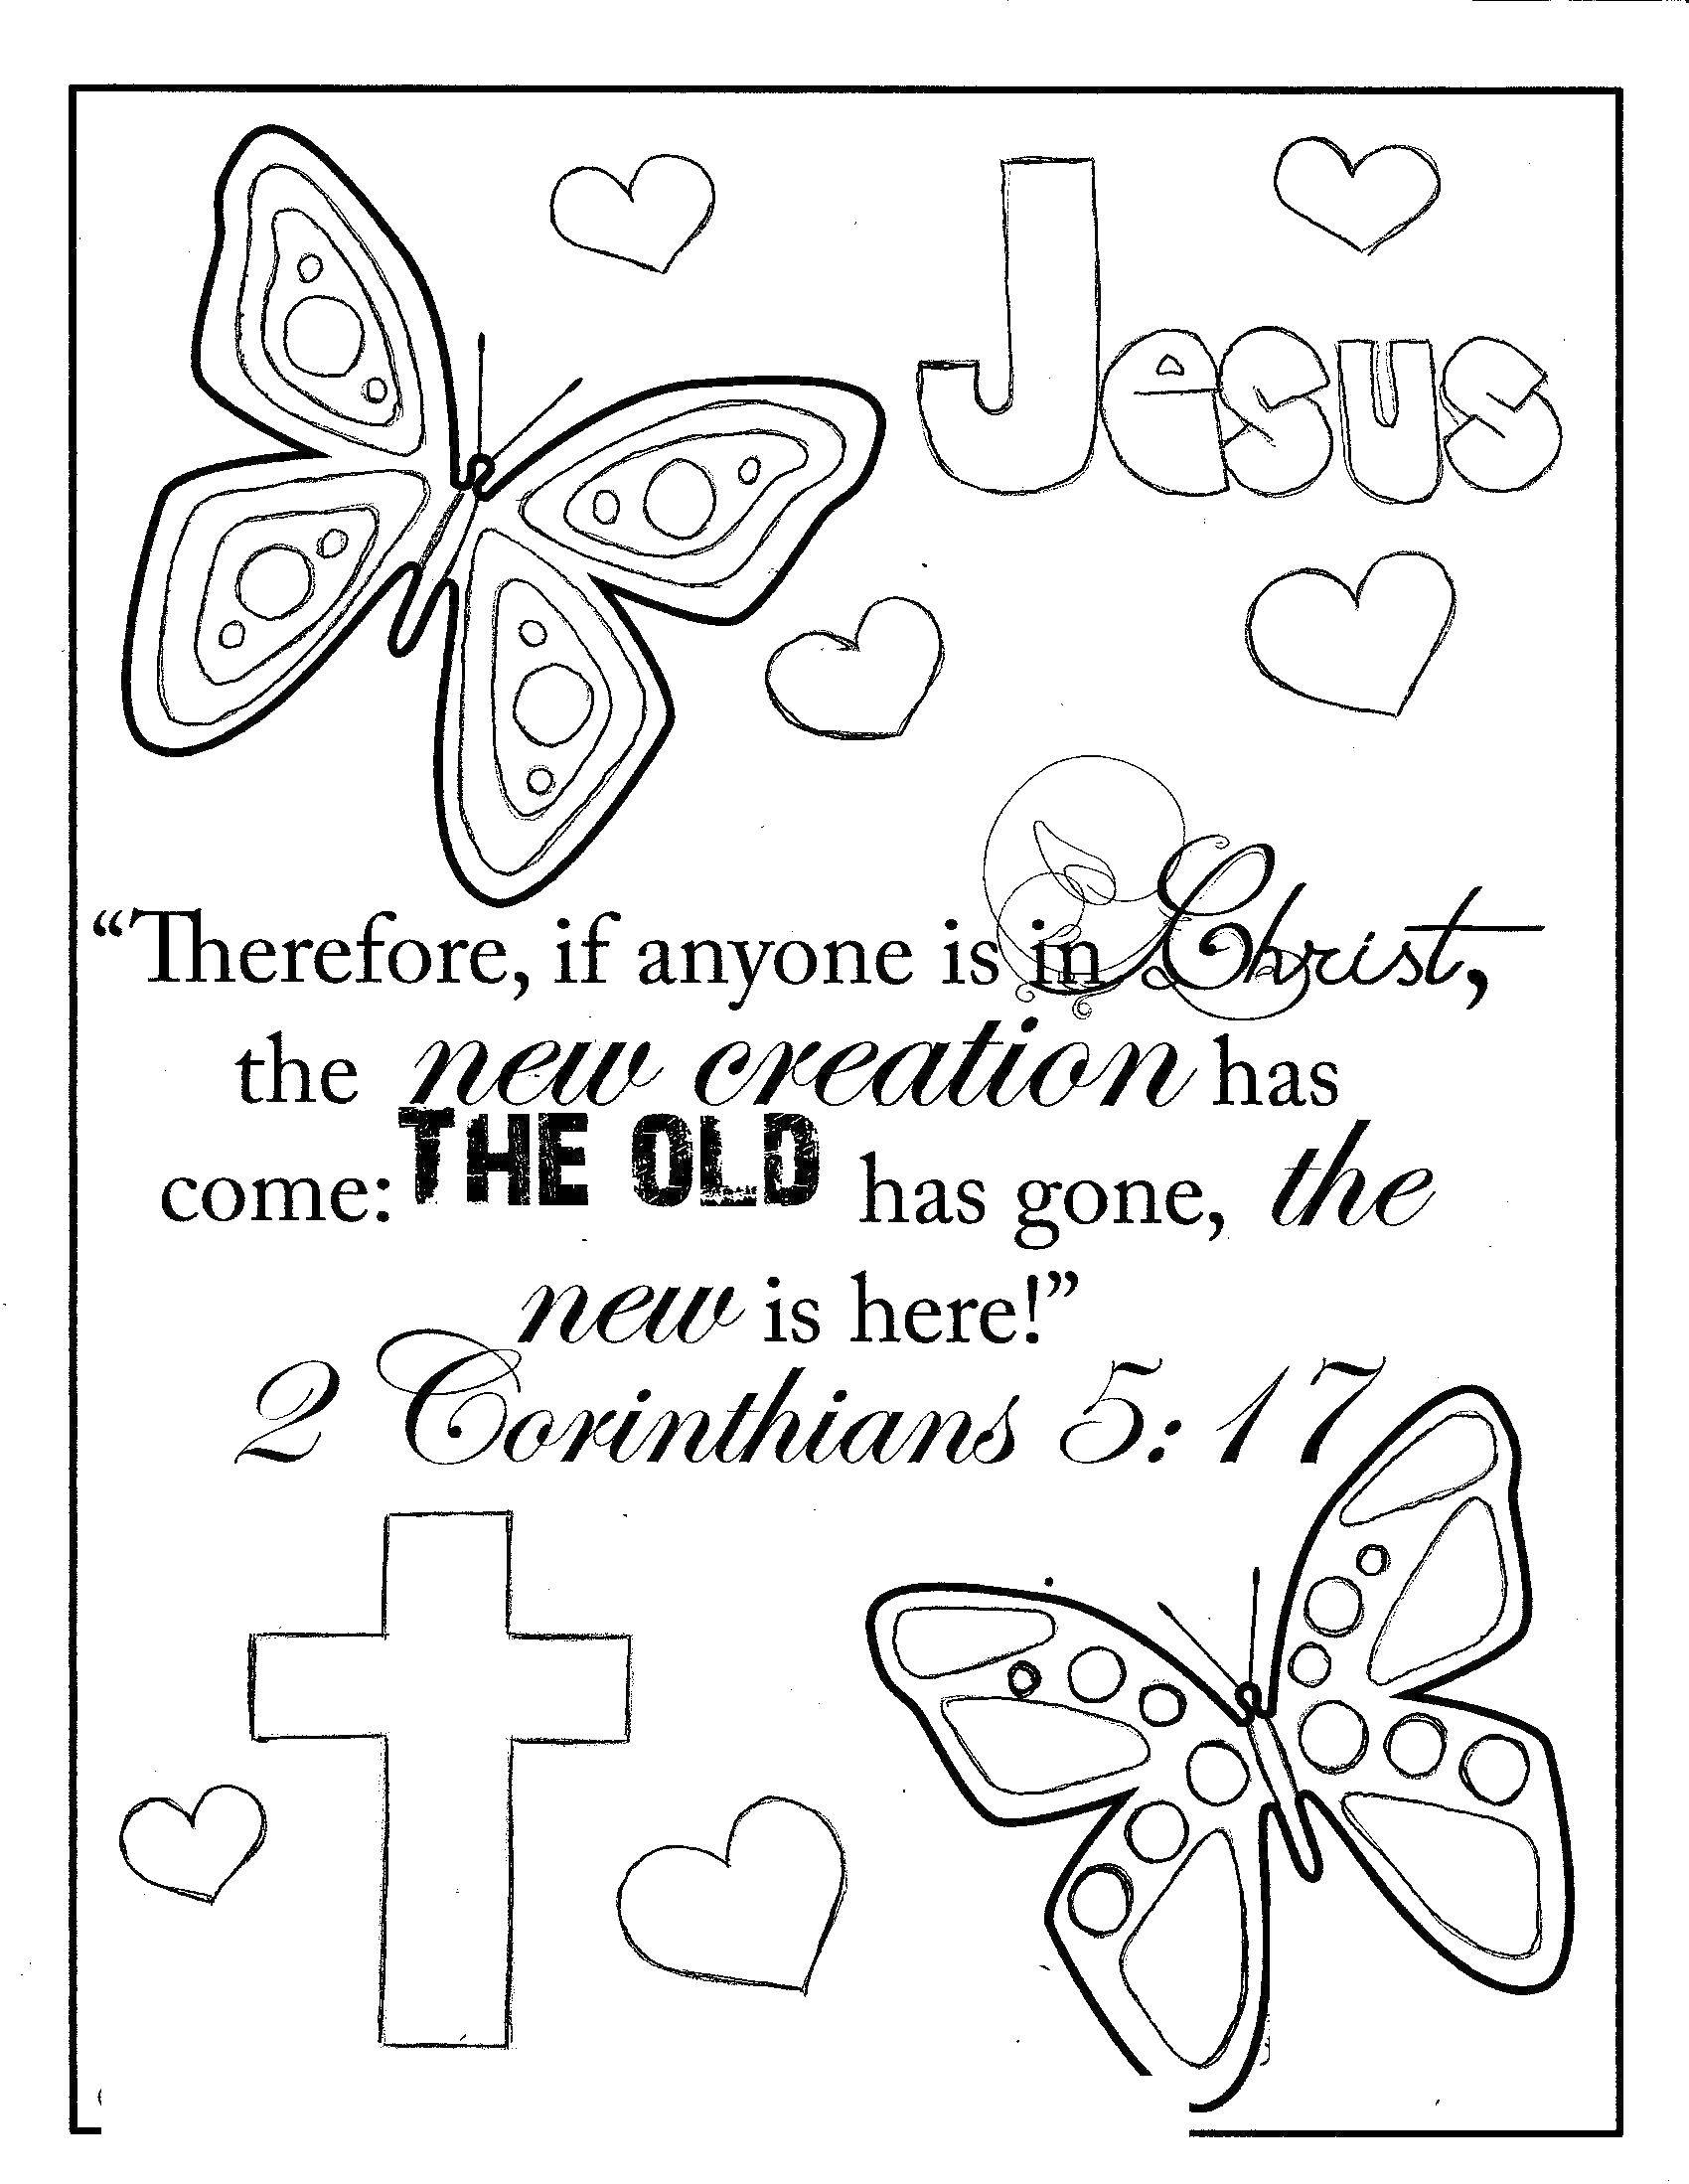 Coloring Inscriptions in English. Category the Bible. Tags:  inscriptions, religion, Jesus.